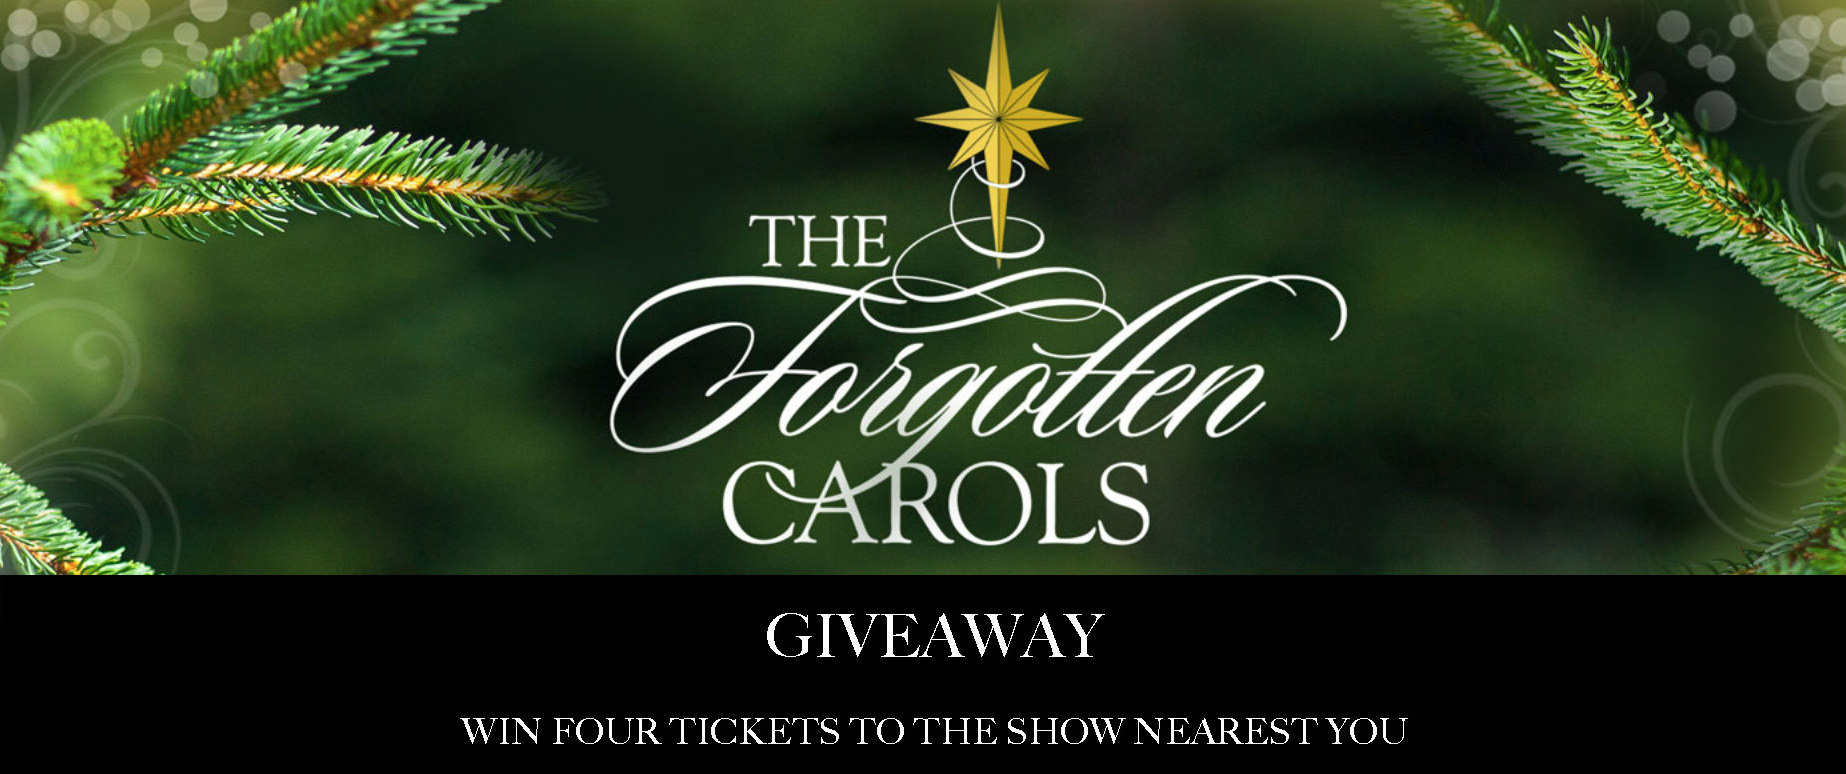 The Forgotten Carols - Q&A with Michael McLean + Giveaway - The Things I Love Most